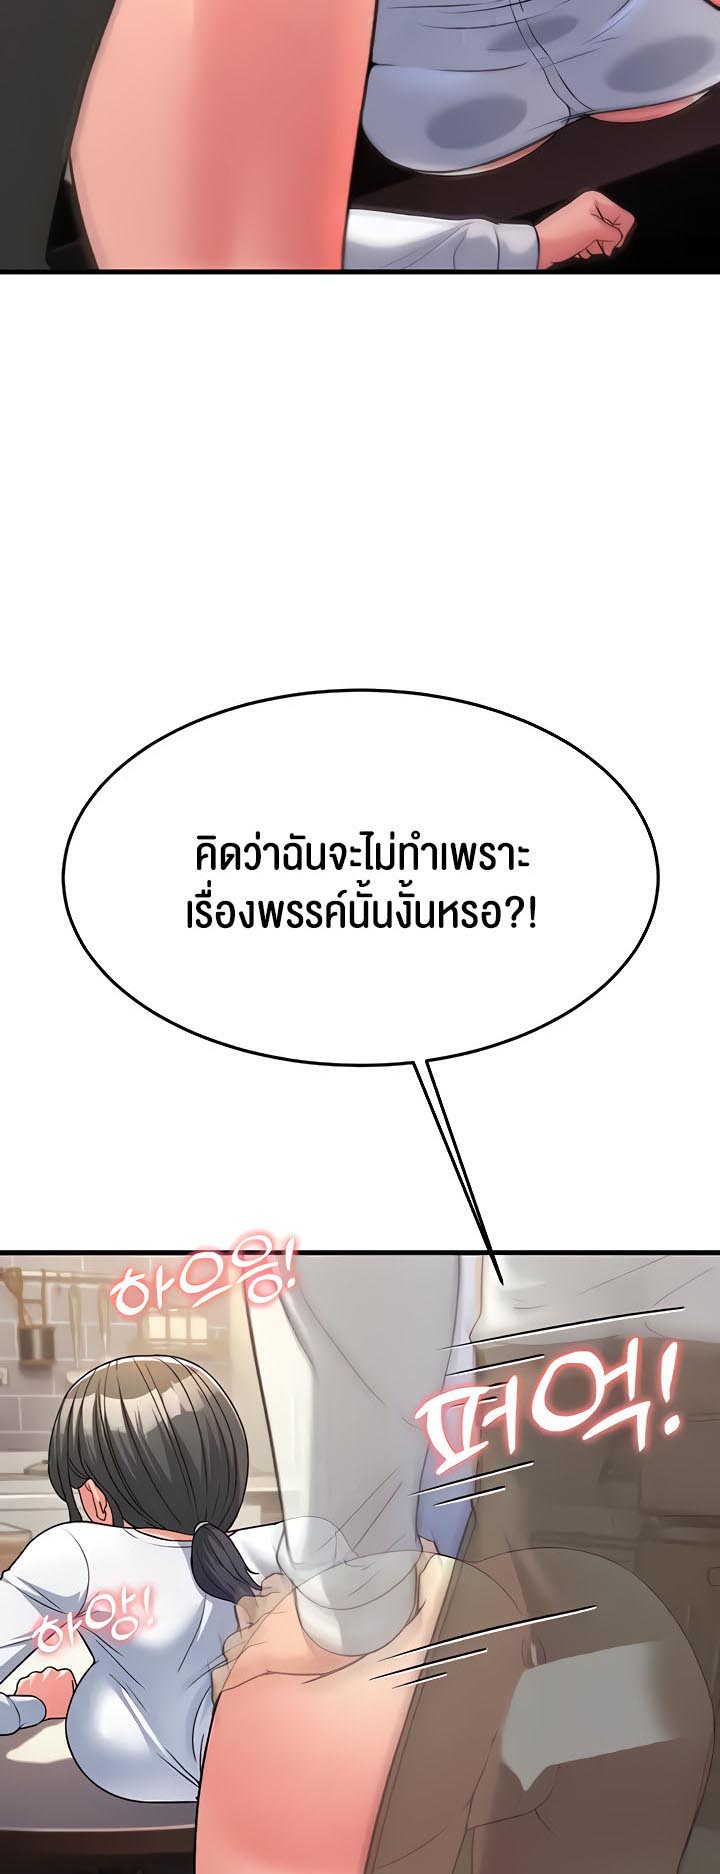 à¸­à¹ˆà¸²à¸™à¹‚à¸”à¸ˆà¸´à¸™ à¹€à¸£à¸·à¹ˆà¸­à¸‡ Mother in Law Bends To My Will 11 27